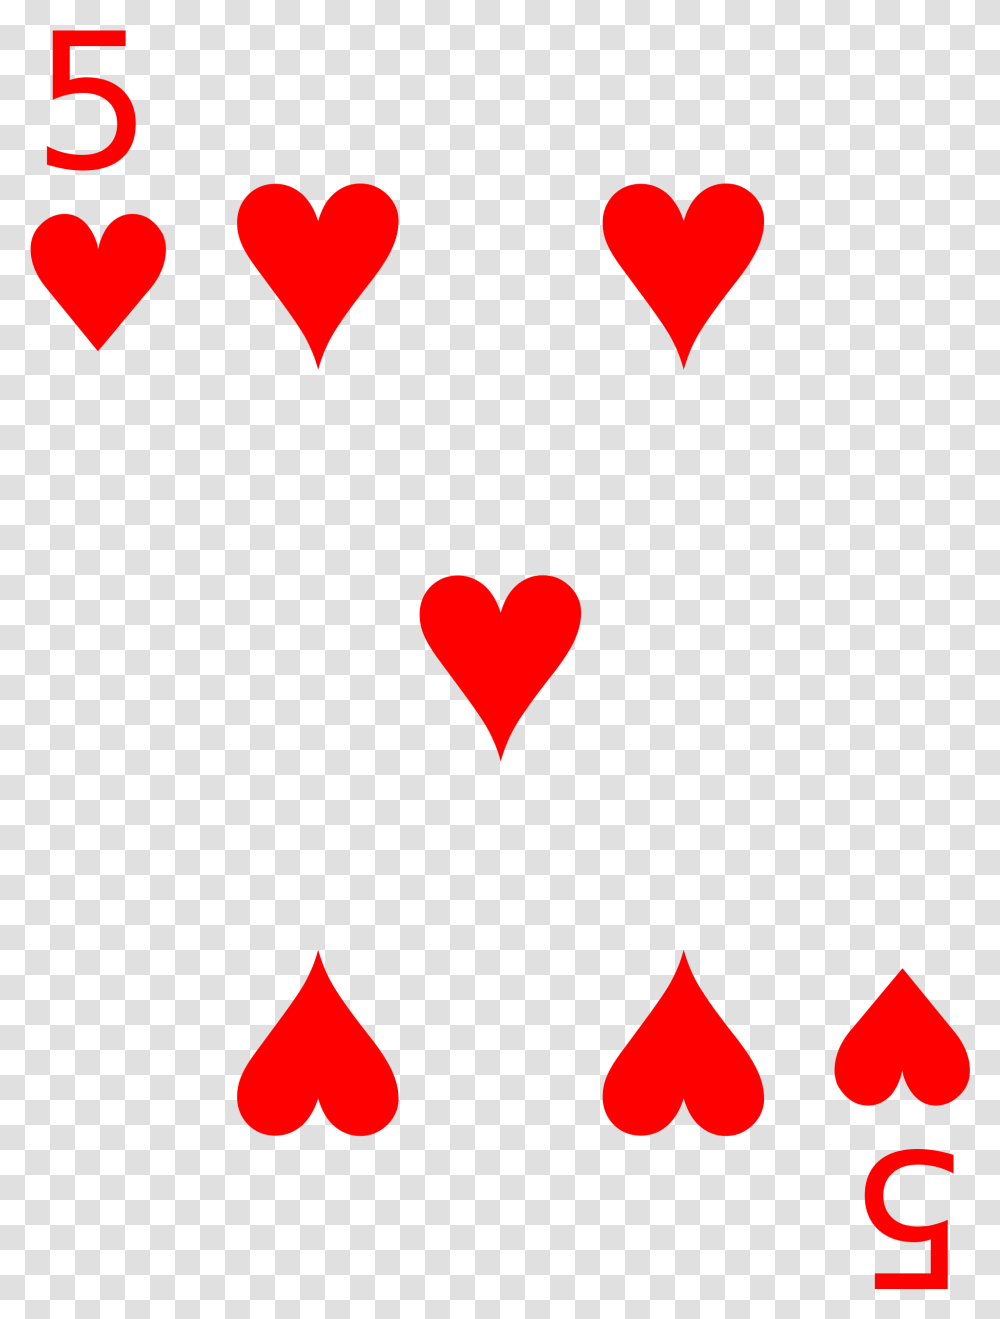 File Cards Heart Wikimedia Commons Open 5 Heart Cards, Triangle, Halloween Transparent Png